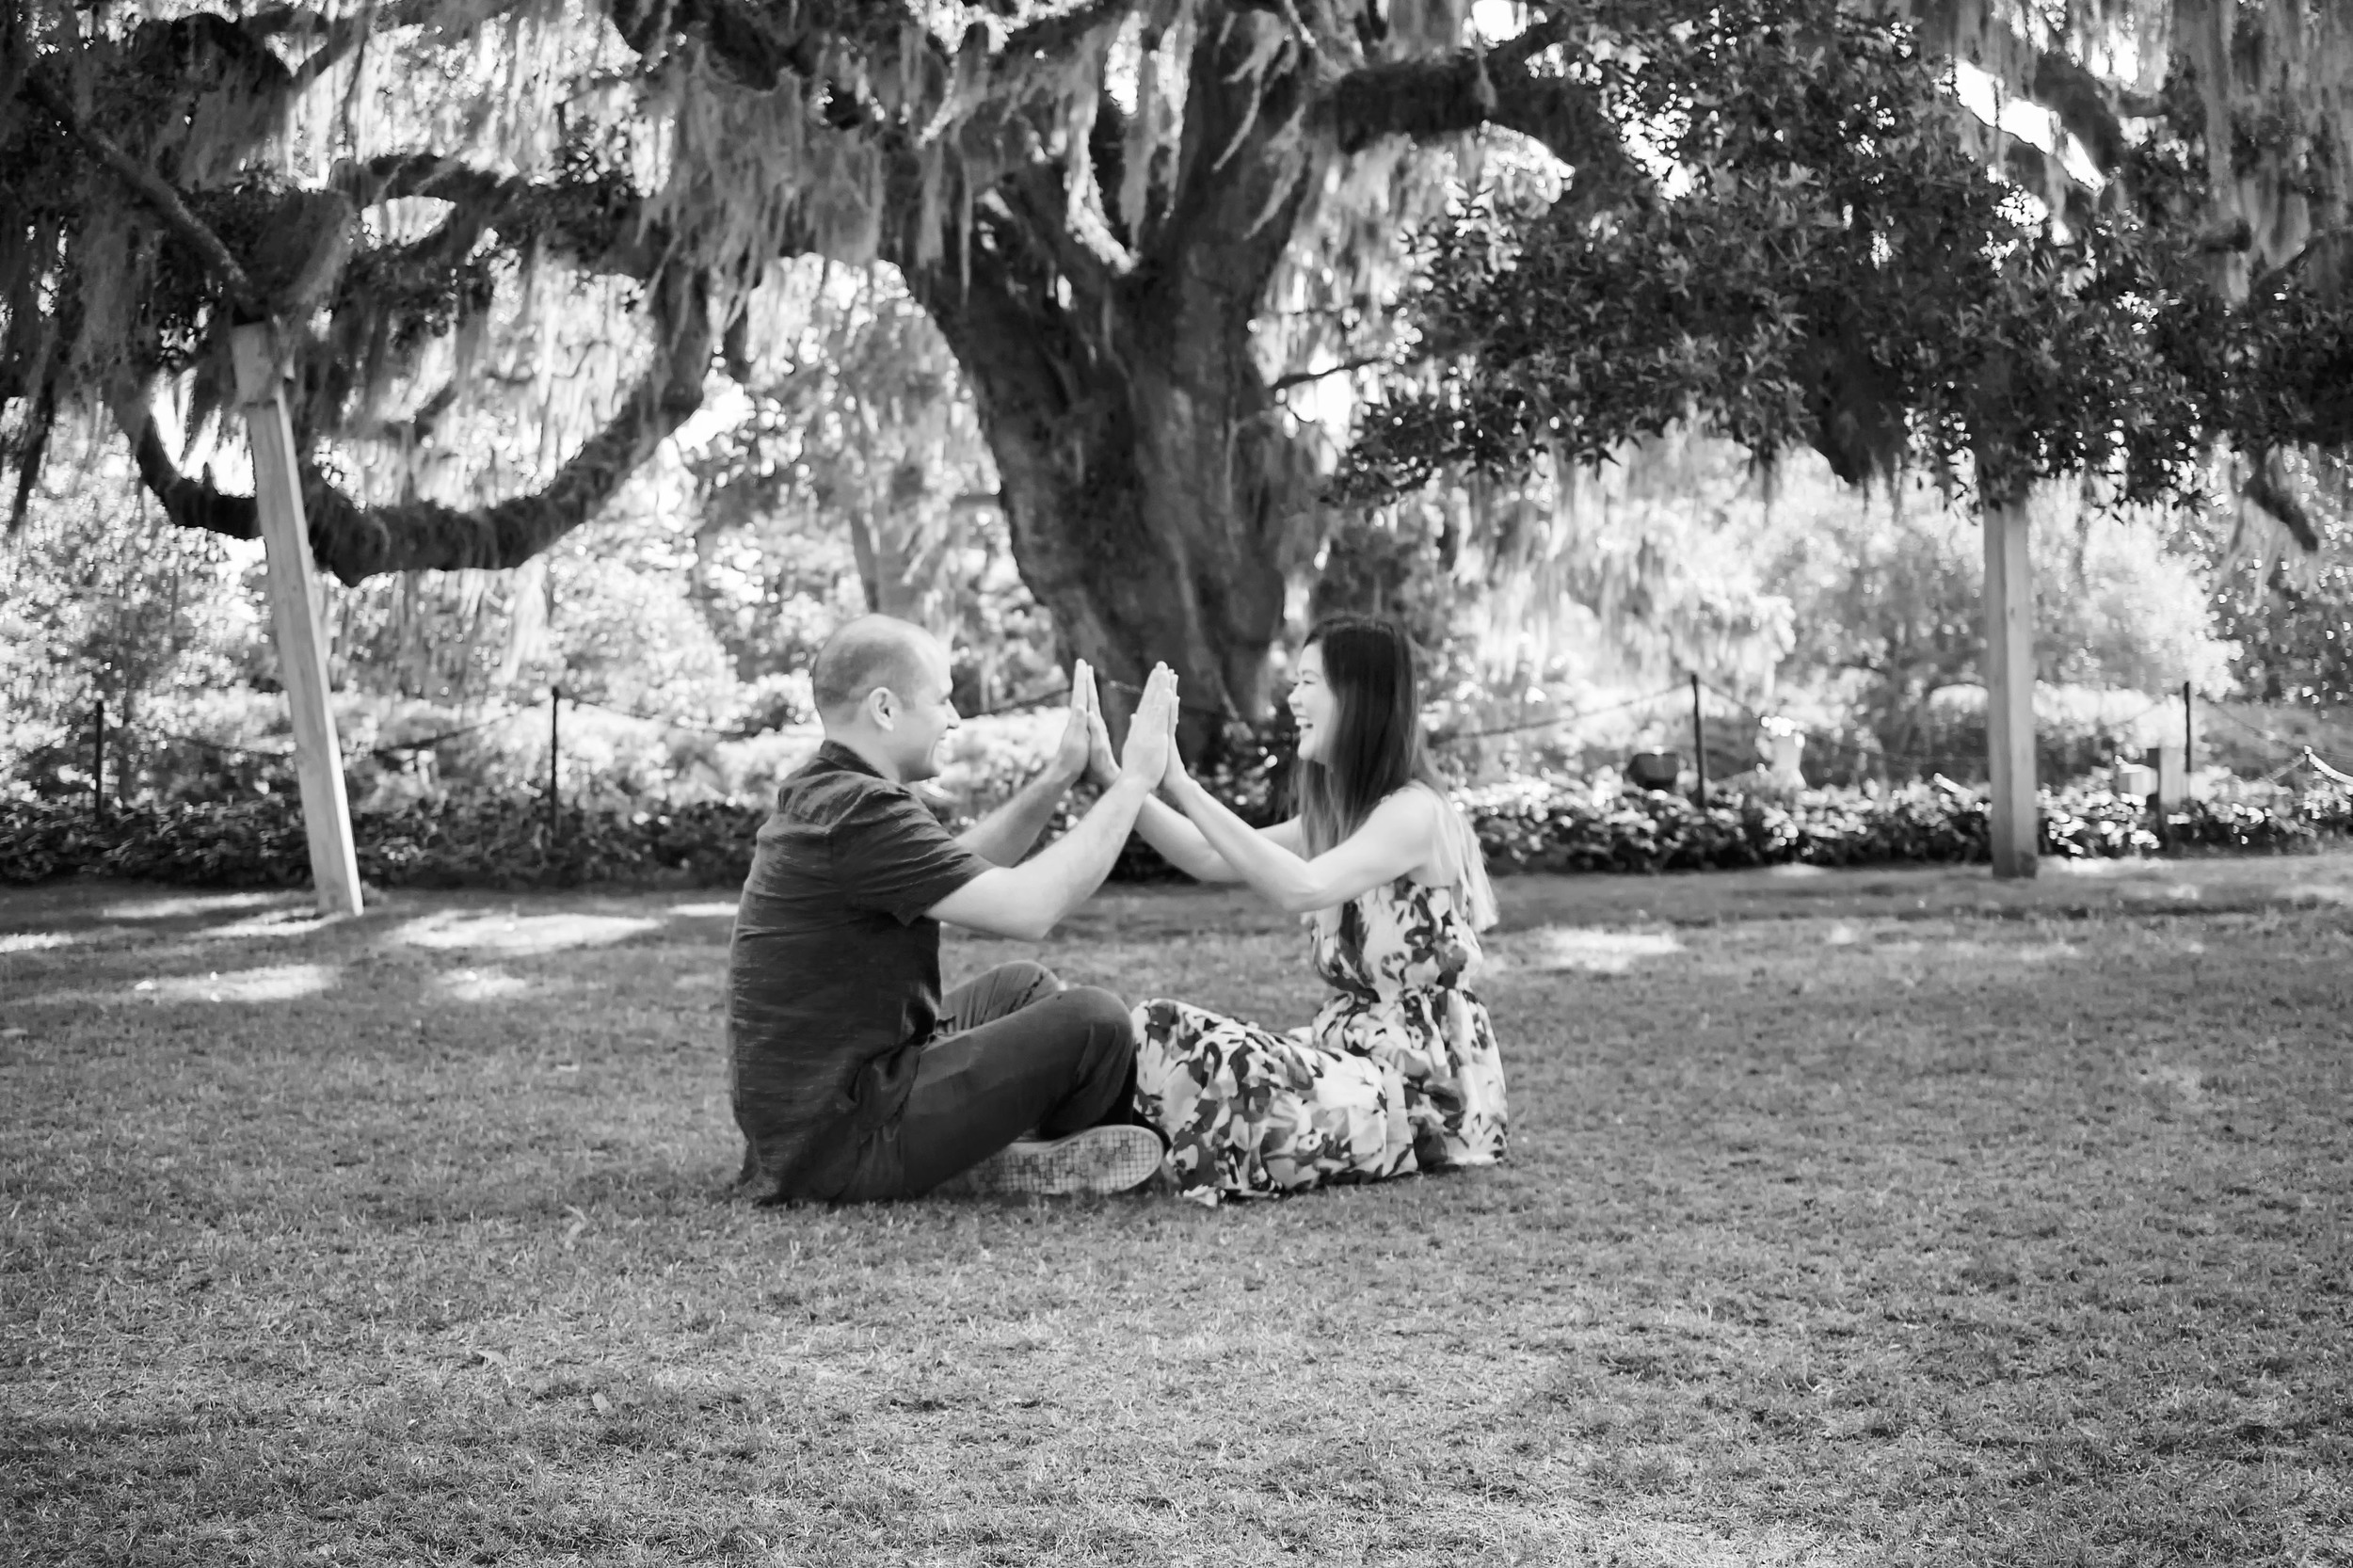 Airlie_Gardens_Engagement_Photography_Brian_&_Amy_51.jpg